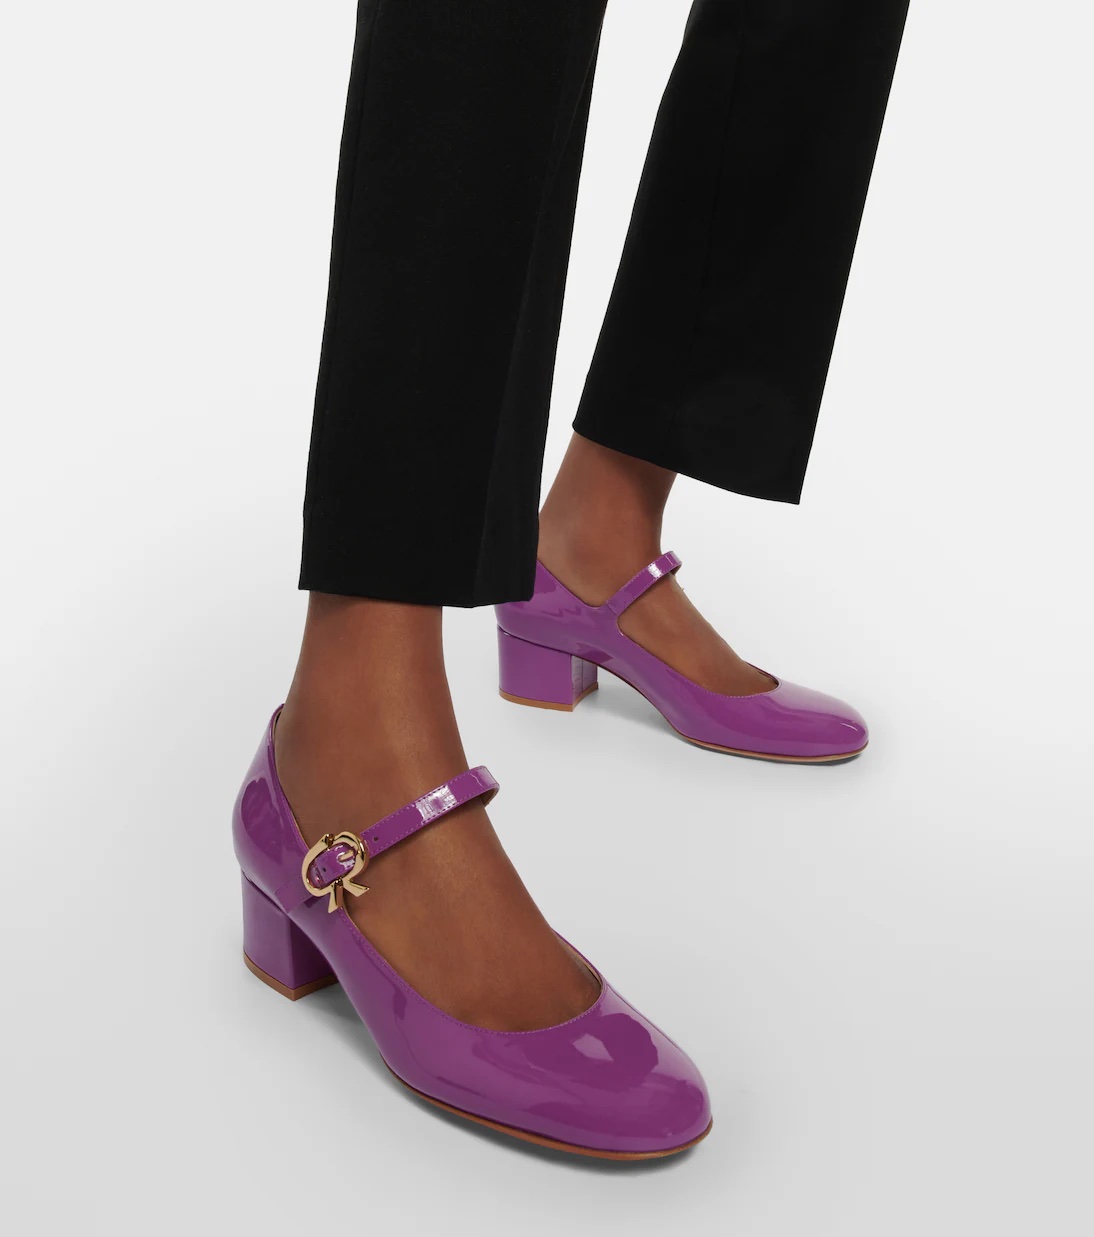 GIANVITO ROSSI Ribbon patent leather Mary Jane pumps